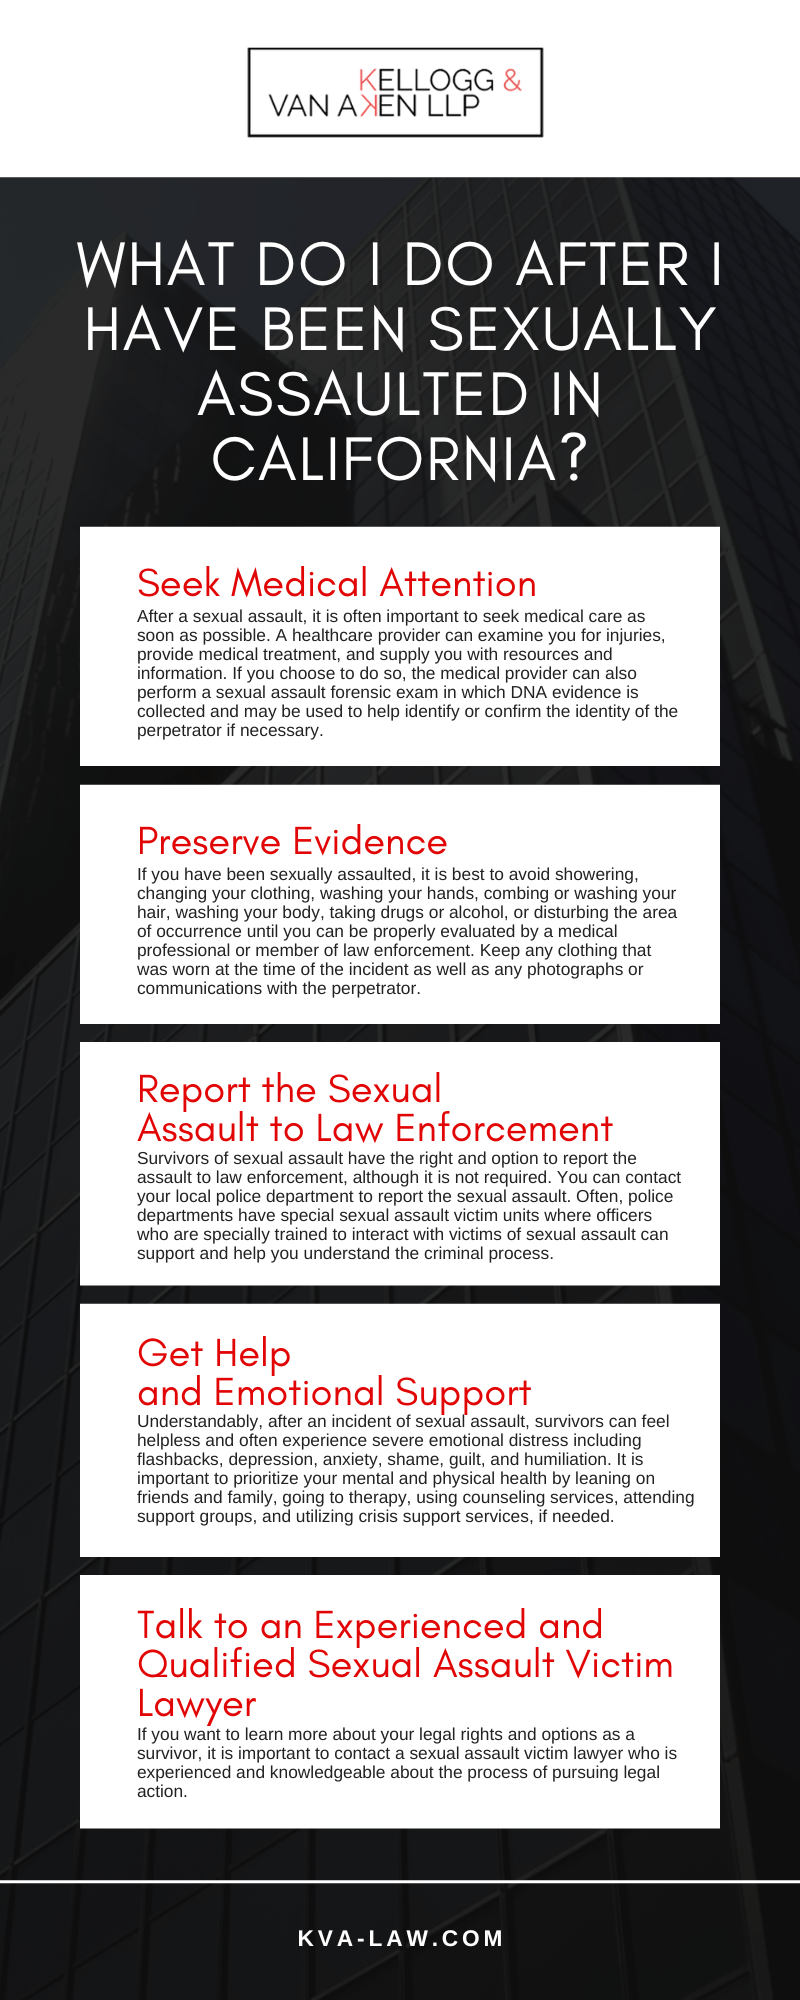 What Do I Do After I have Been Sexually Assaulted In California Infographic